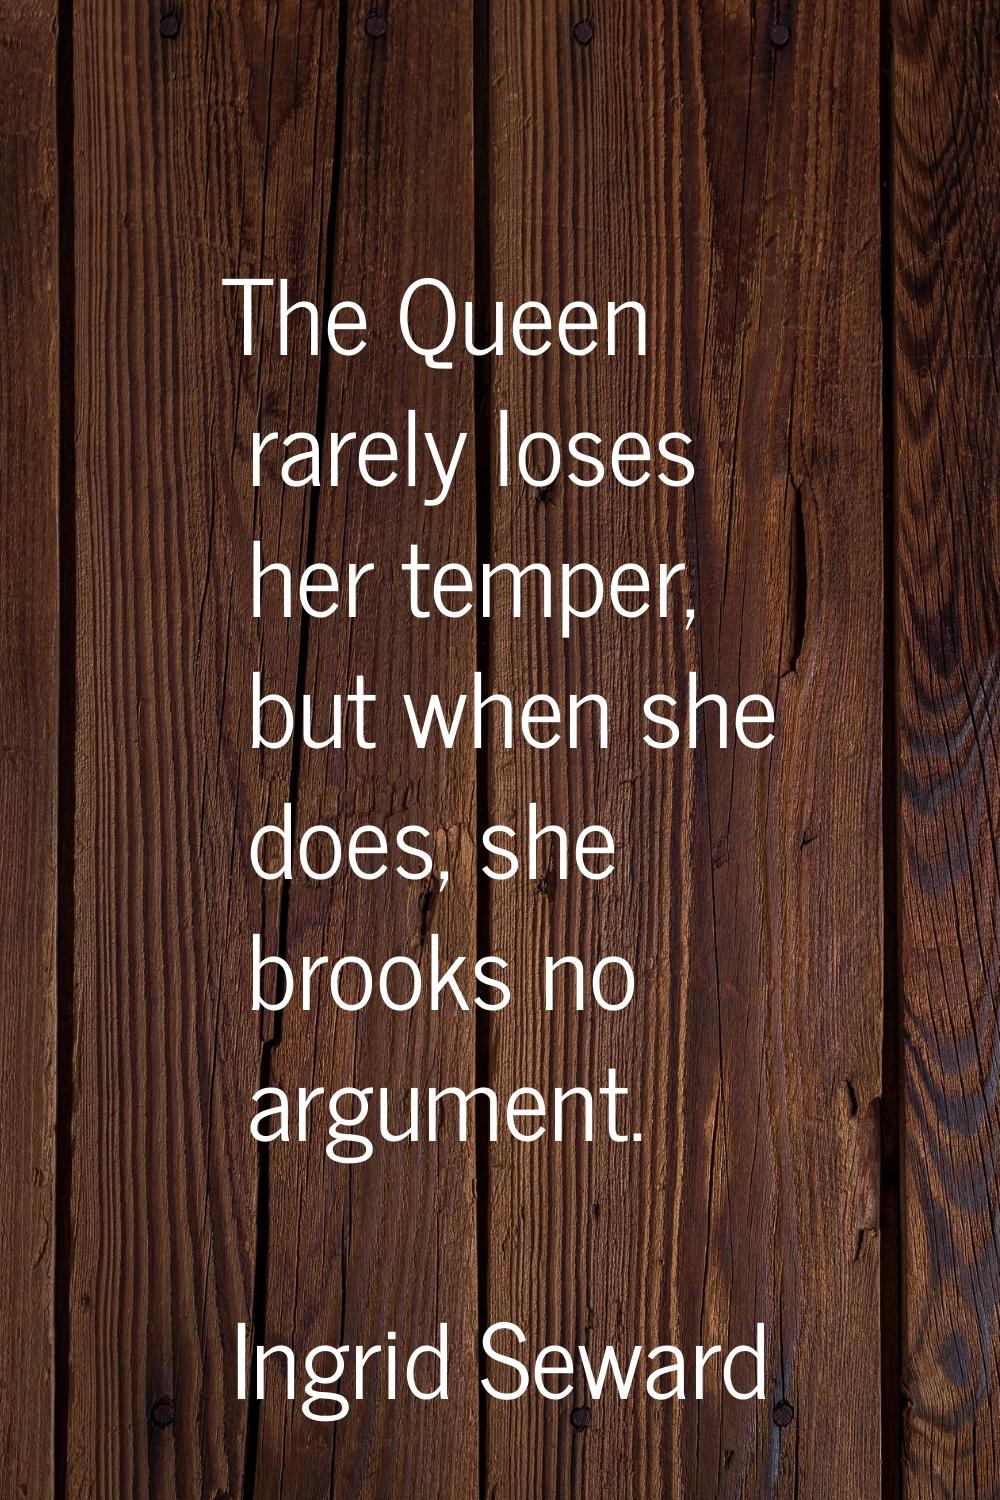 The Queen rarely loses her temper, but when she does, she brooks no argument.